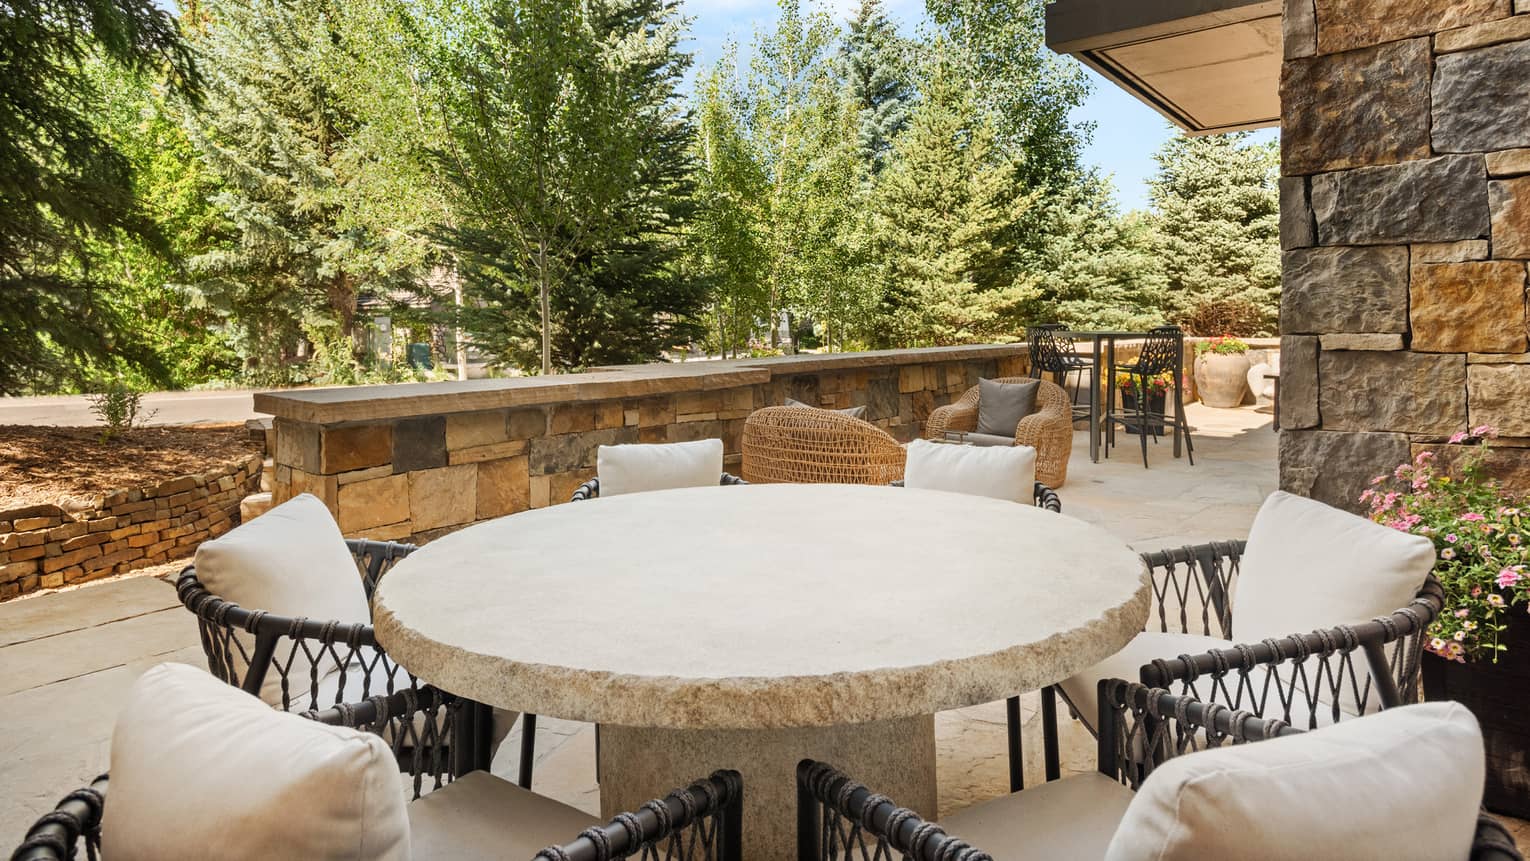 A large stone table on a patio with many chairs.